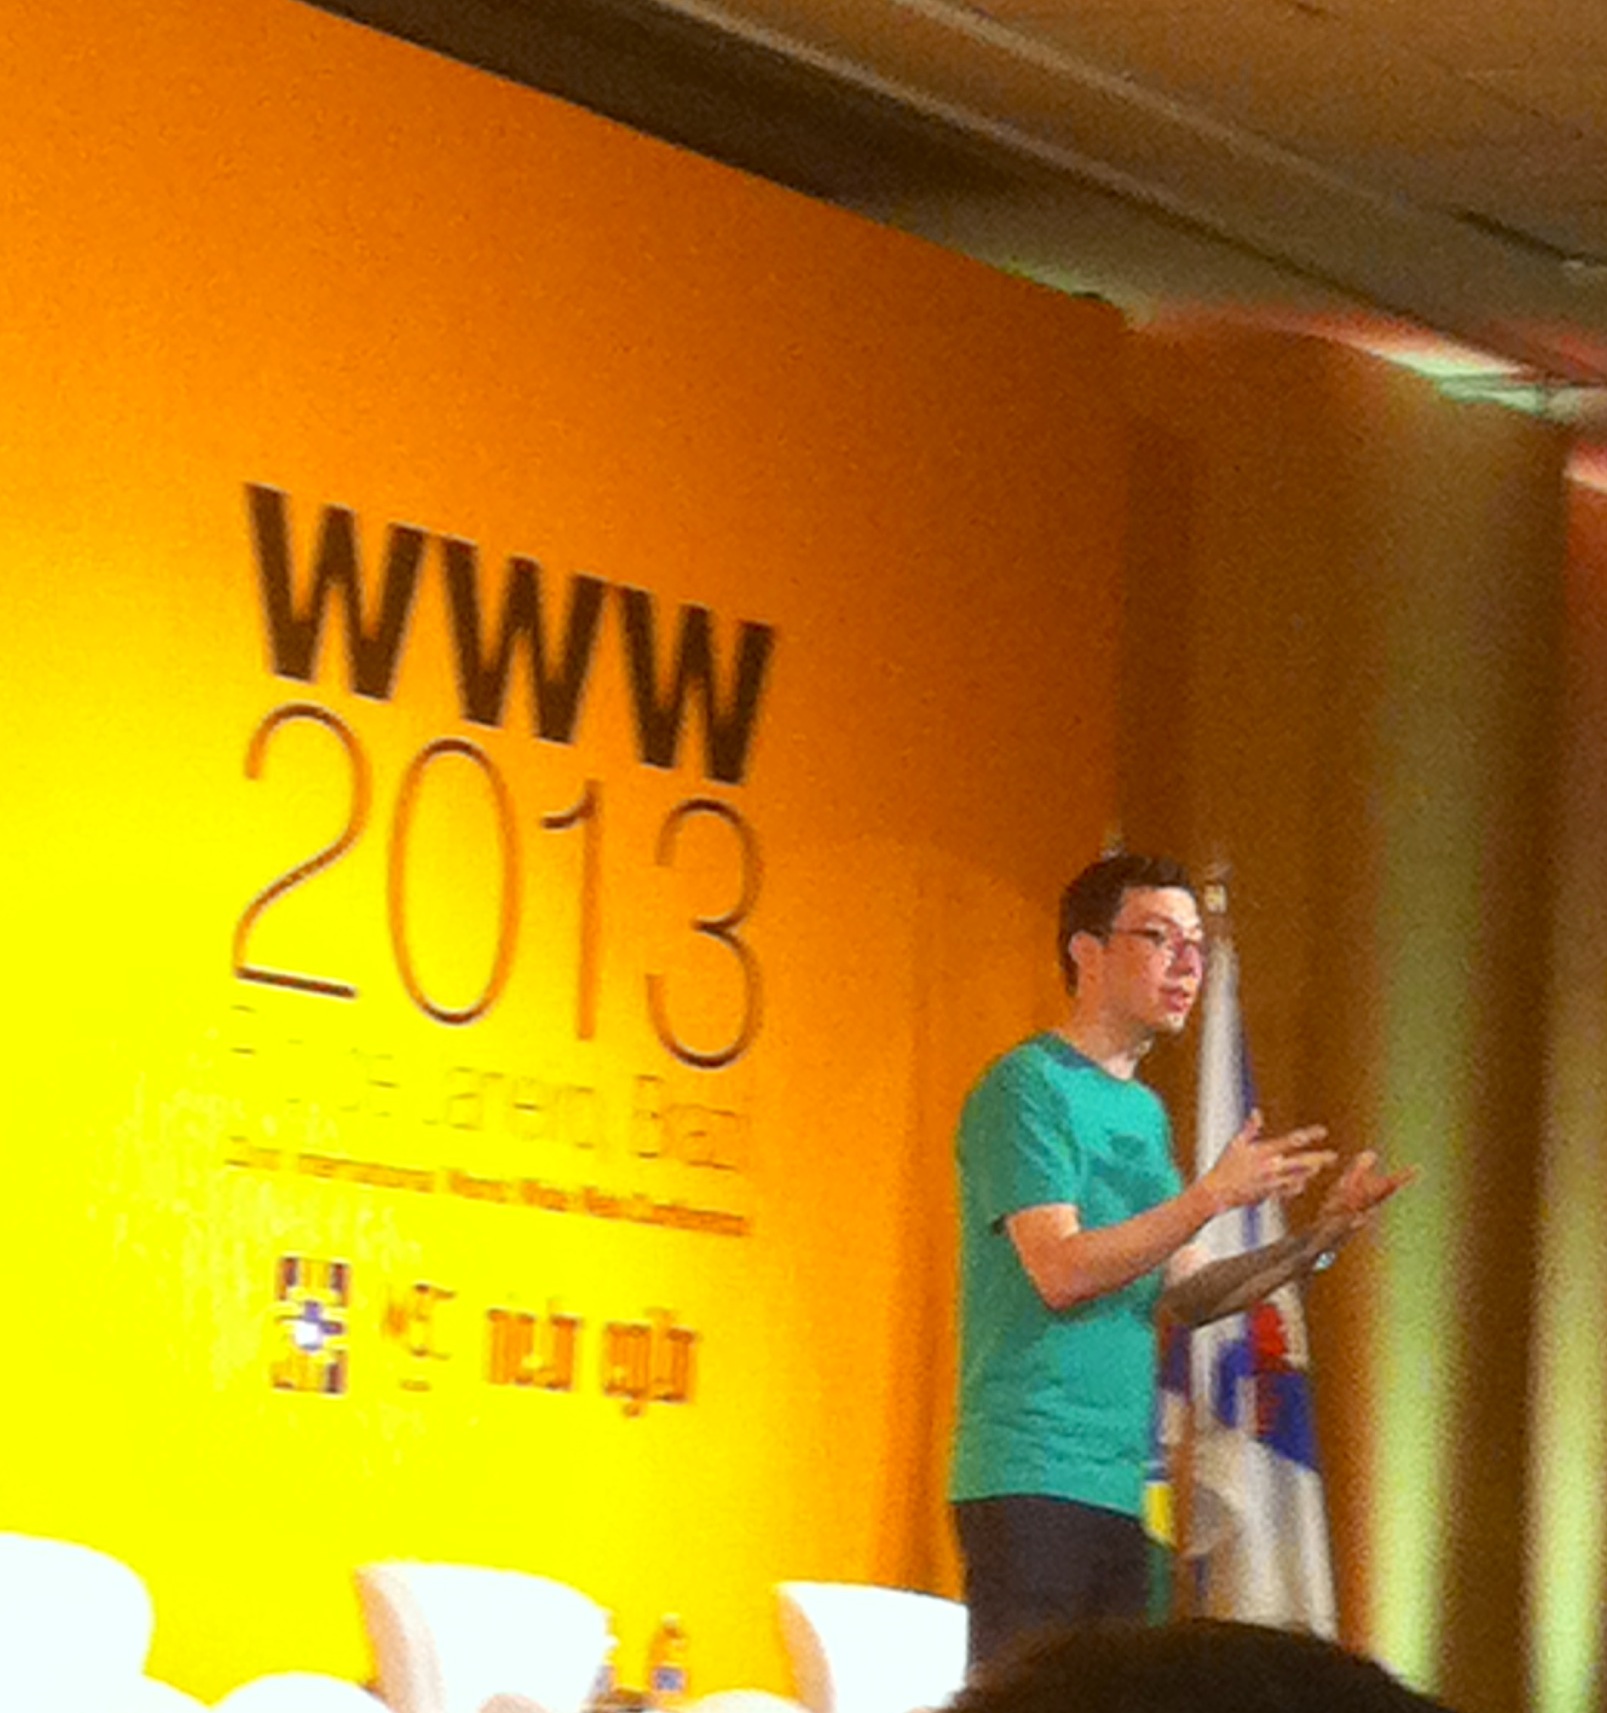 Top Tech in Rio for WWW2013 Conference